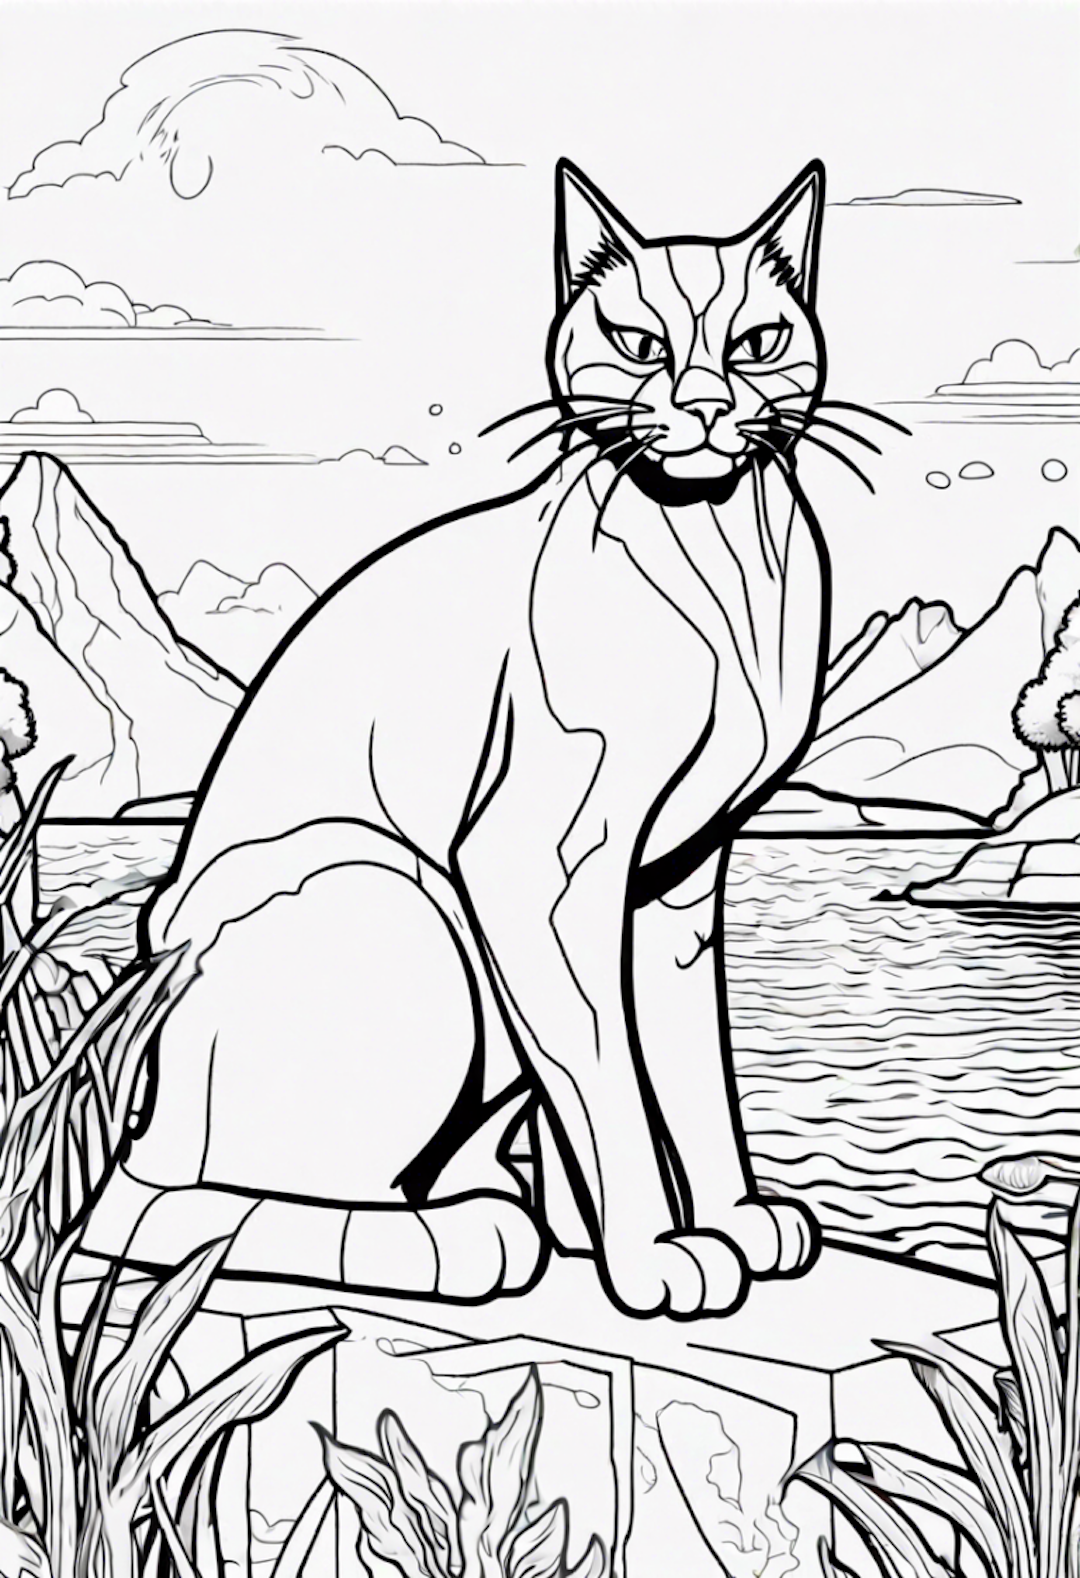 Regal Cat by the Serene Lake coloring pages